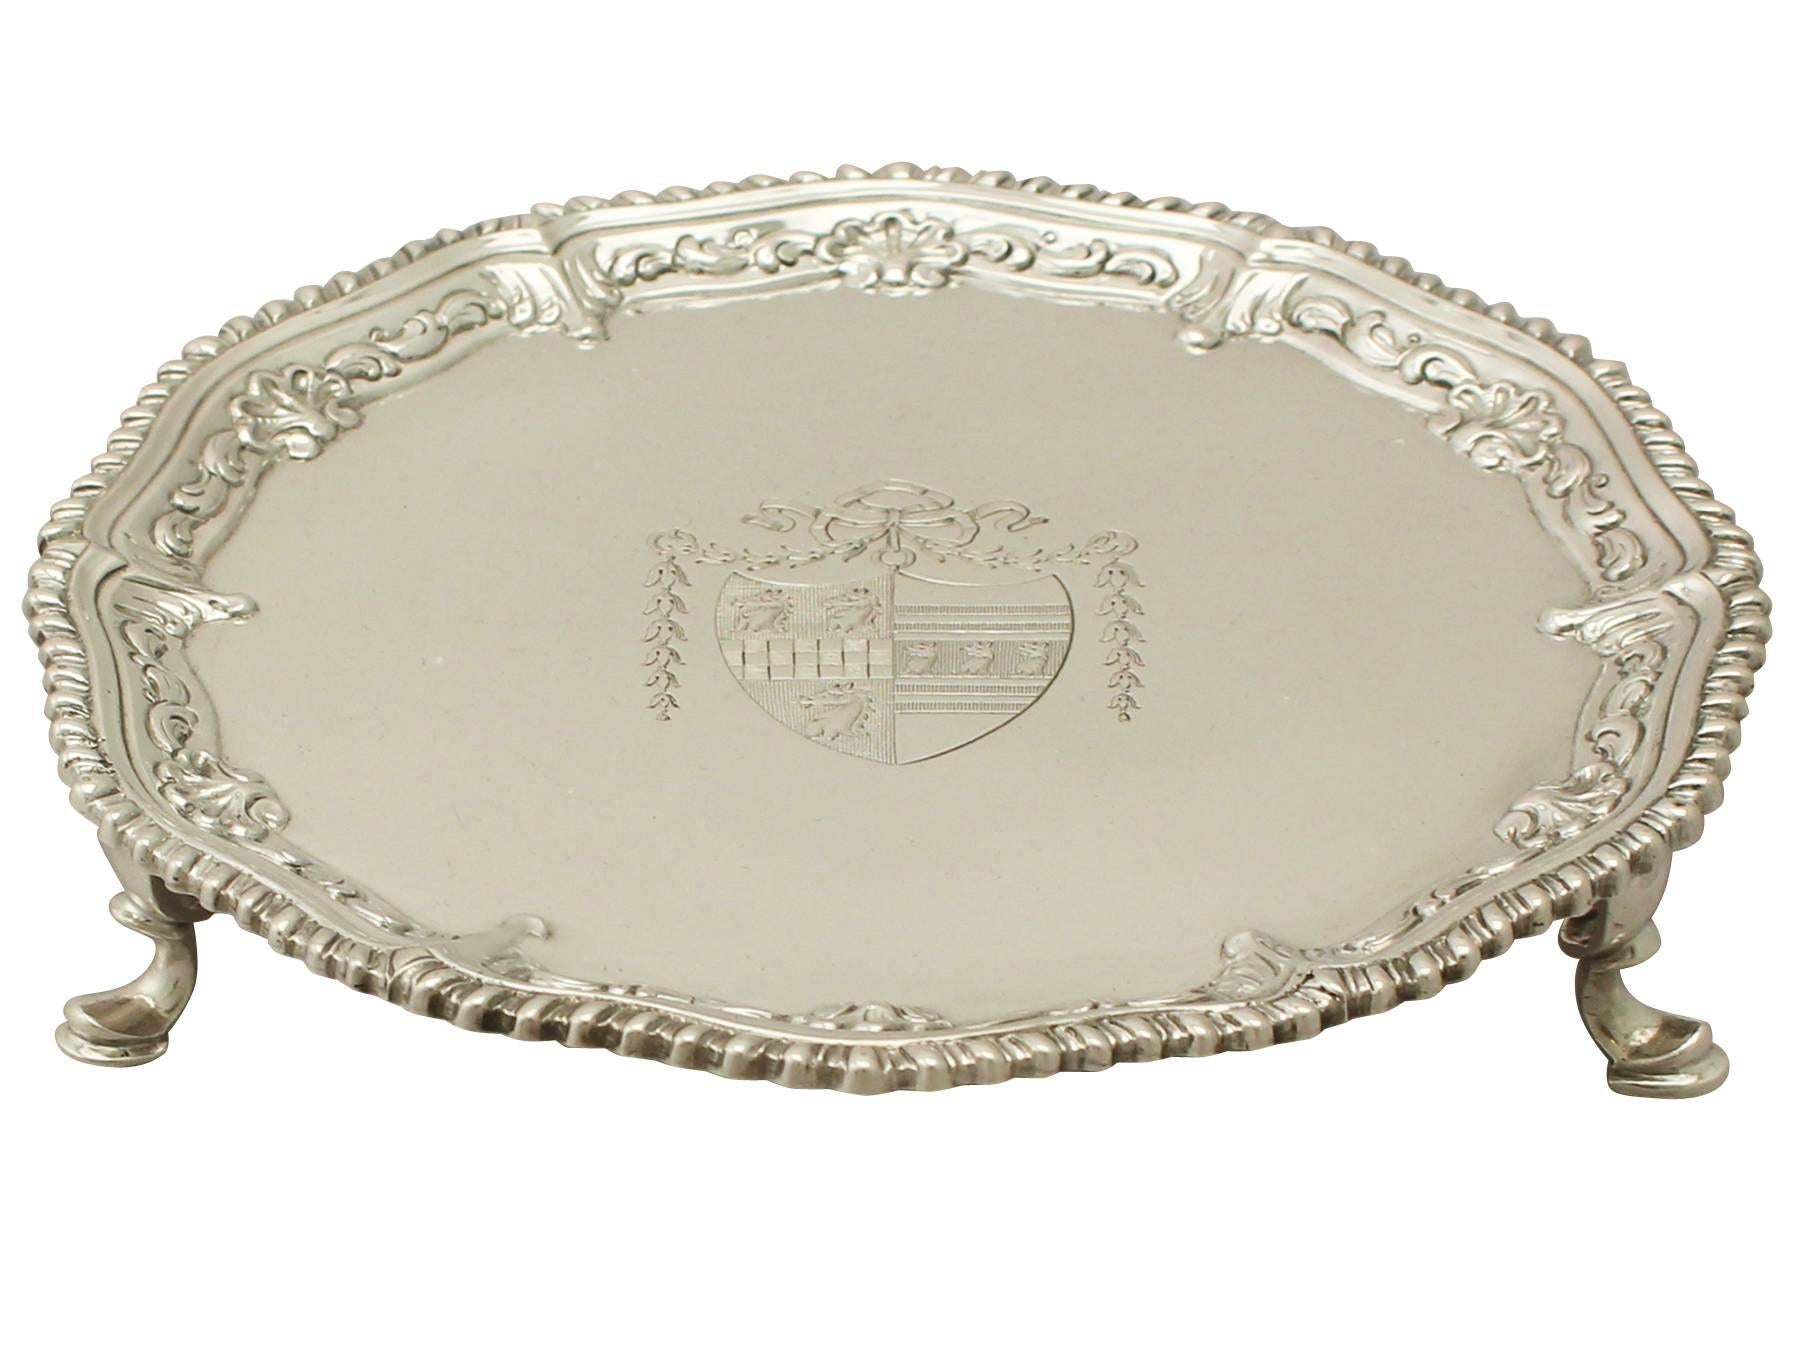 An exceptional, fine and impressive antique George III English sterling silver waiter; an addition to our Georgian dining silverware collection.

This impressive antique George III waiter in sterling silver has a circular shaped form.

The